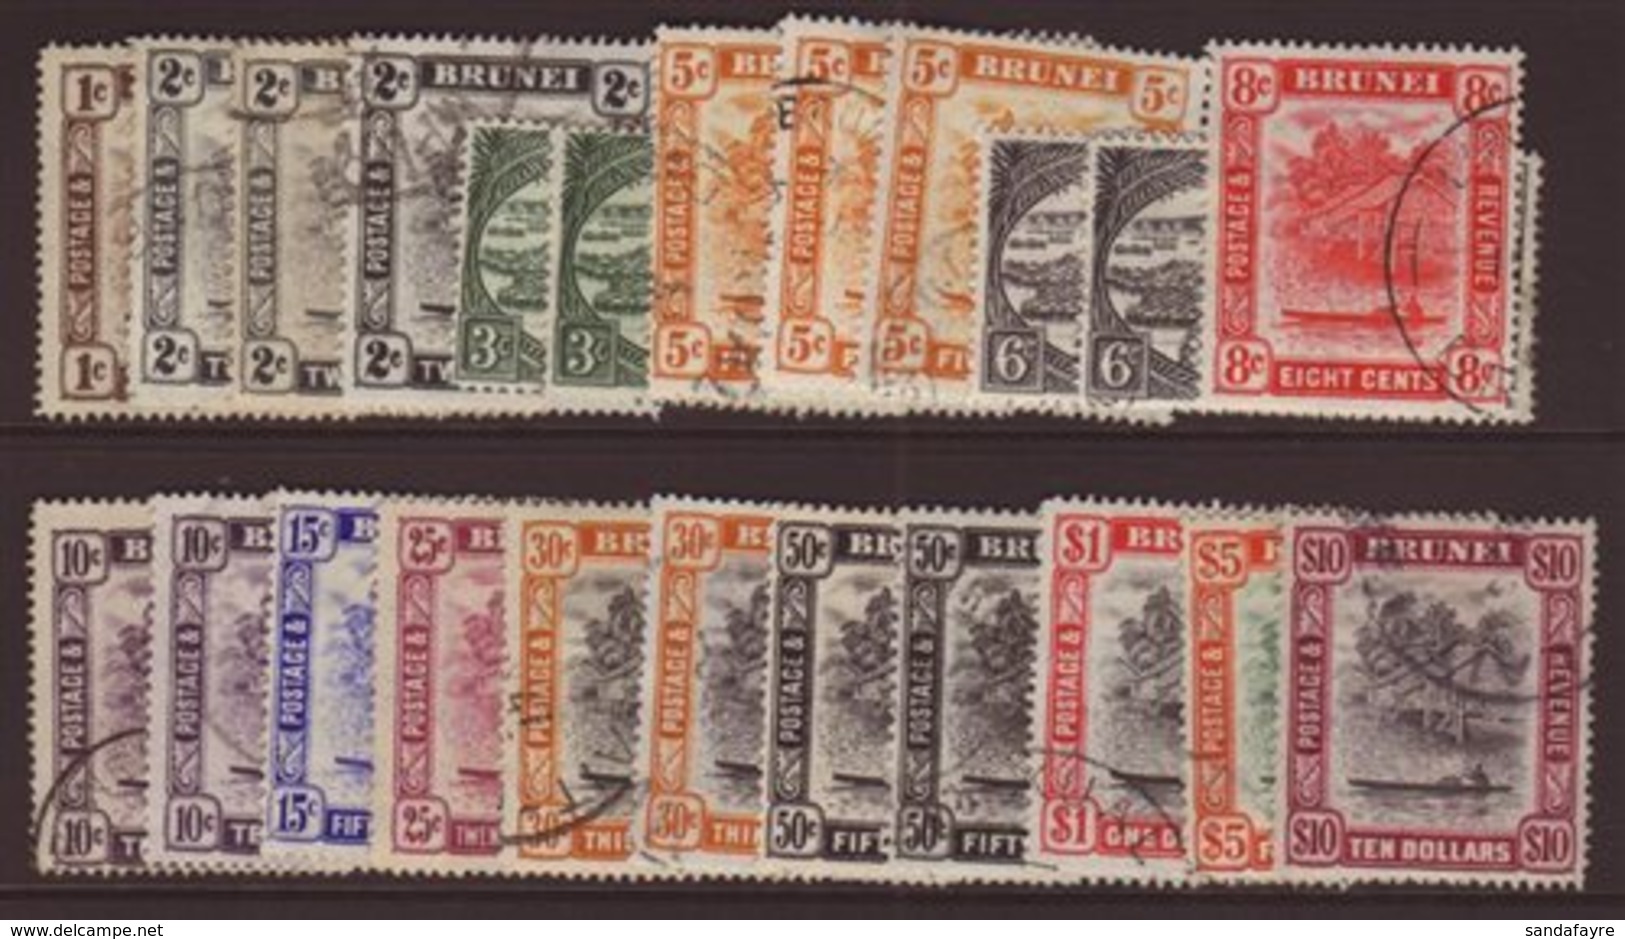 19478-51  Complete Set SG 79/92 Plus Perf Changes Including 5c, 30c & 50c, , Very Fine Cds Used. (23 Stamps) For More Im - Brunei (...-1984)